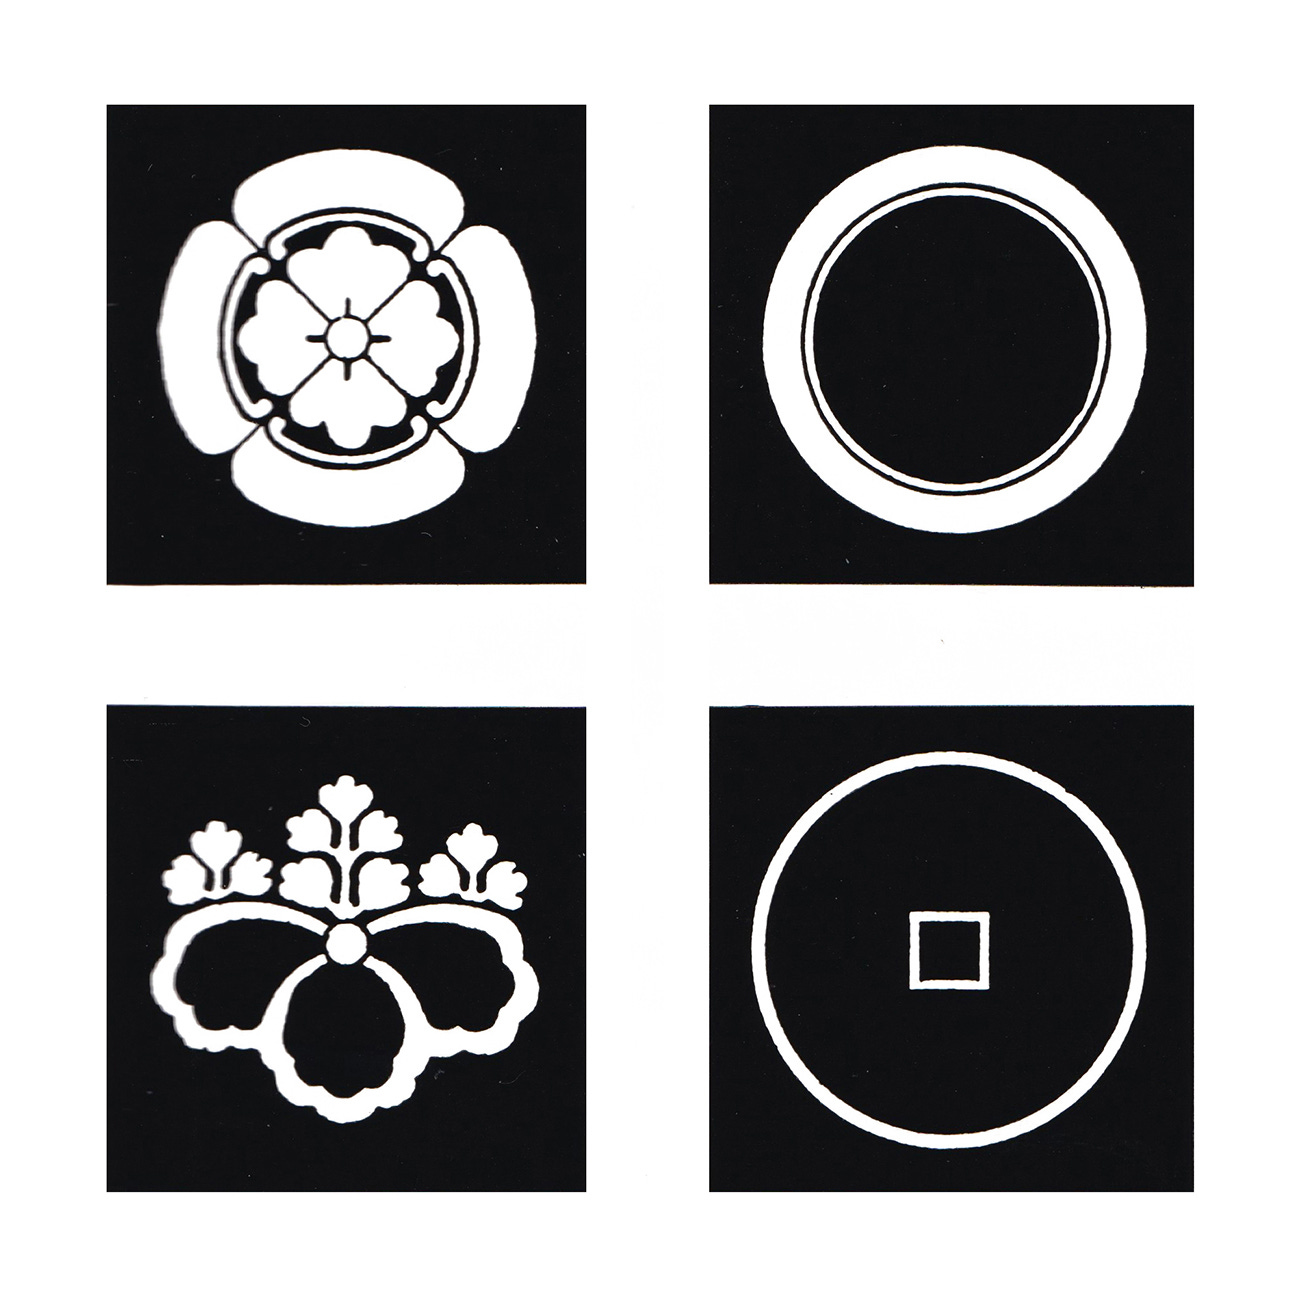 Japanese Emblems in History, 1971, Logo Histories